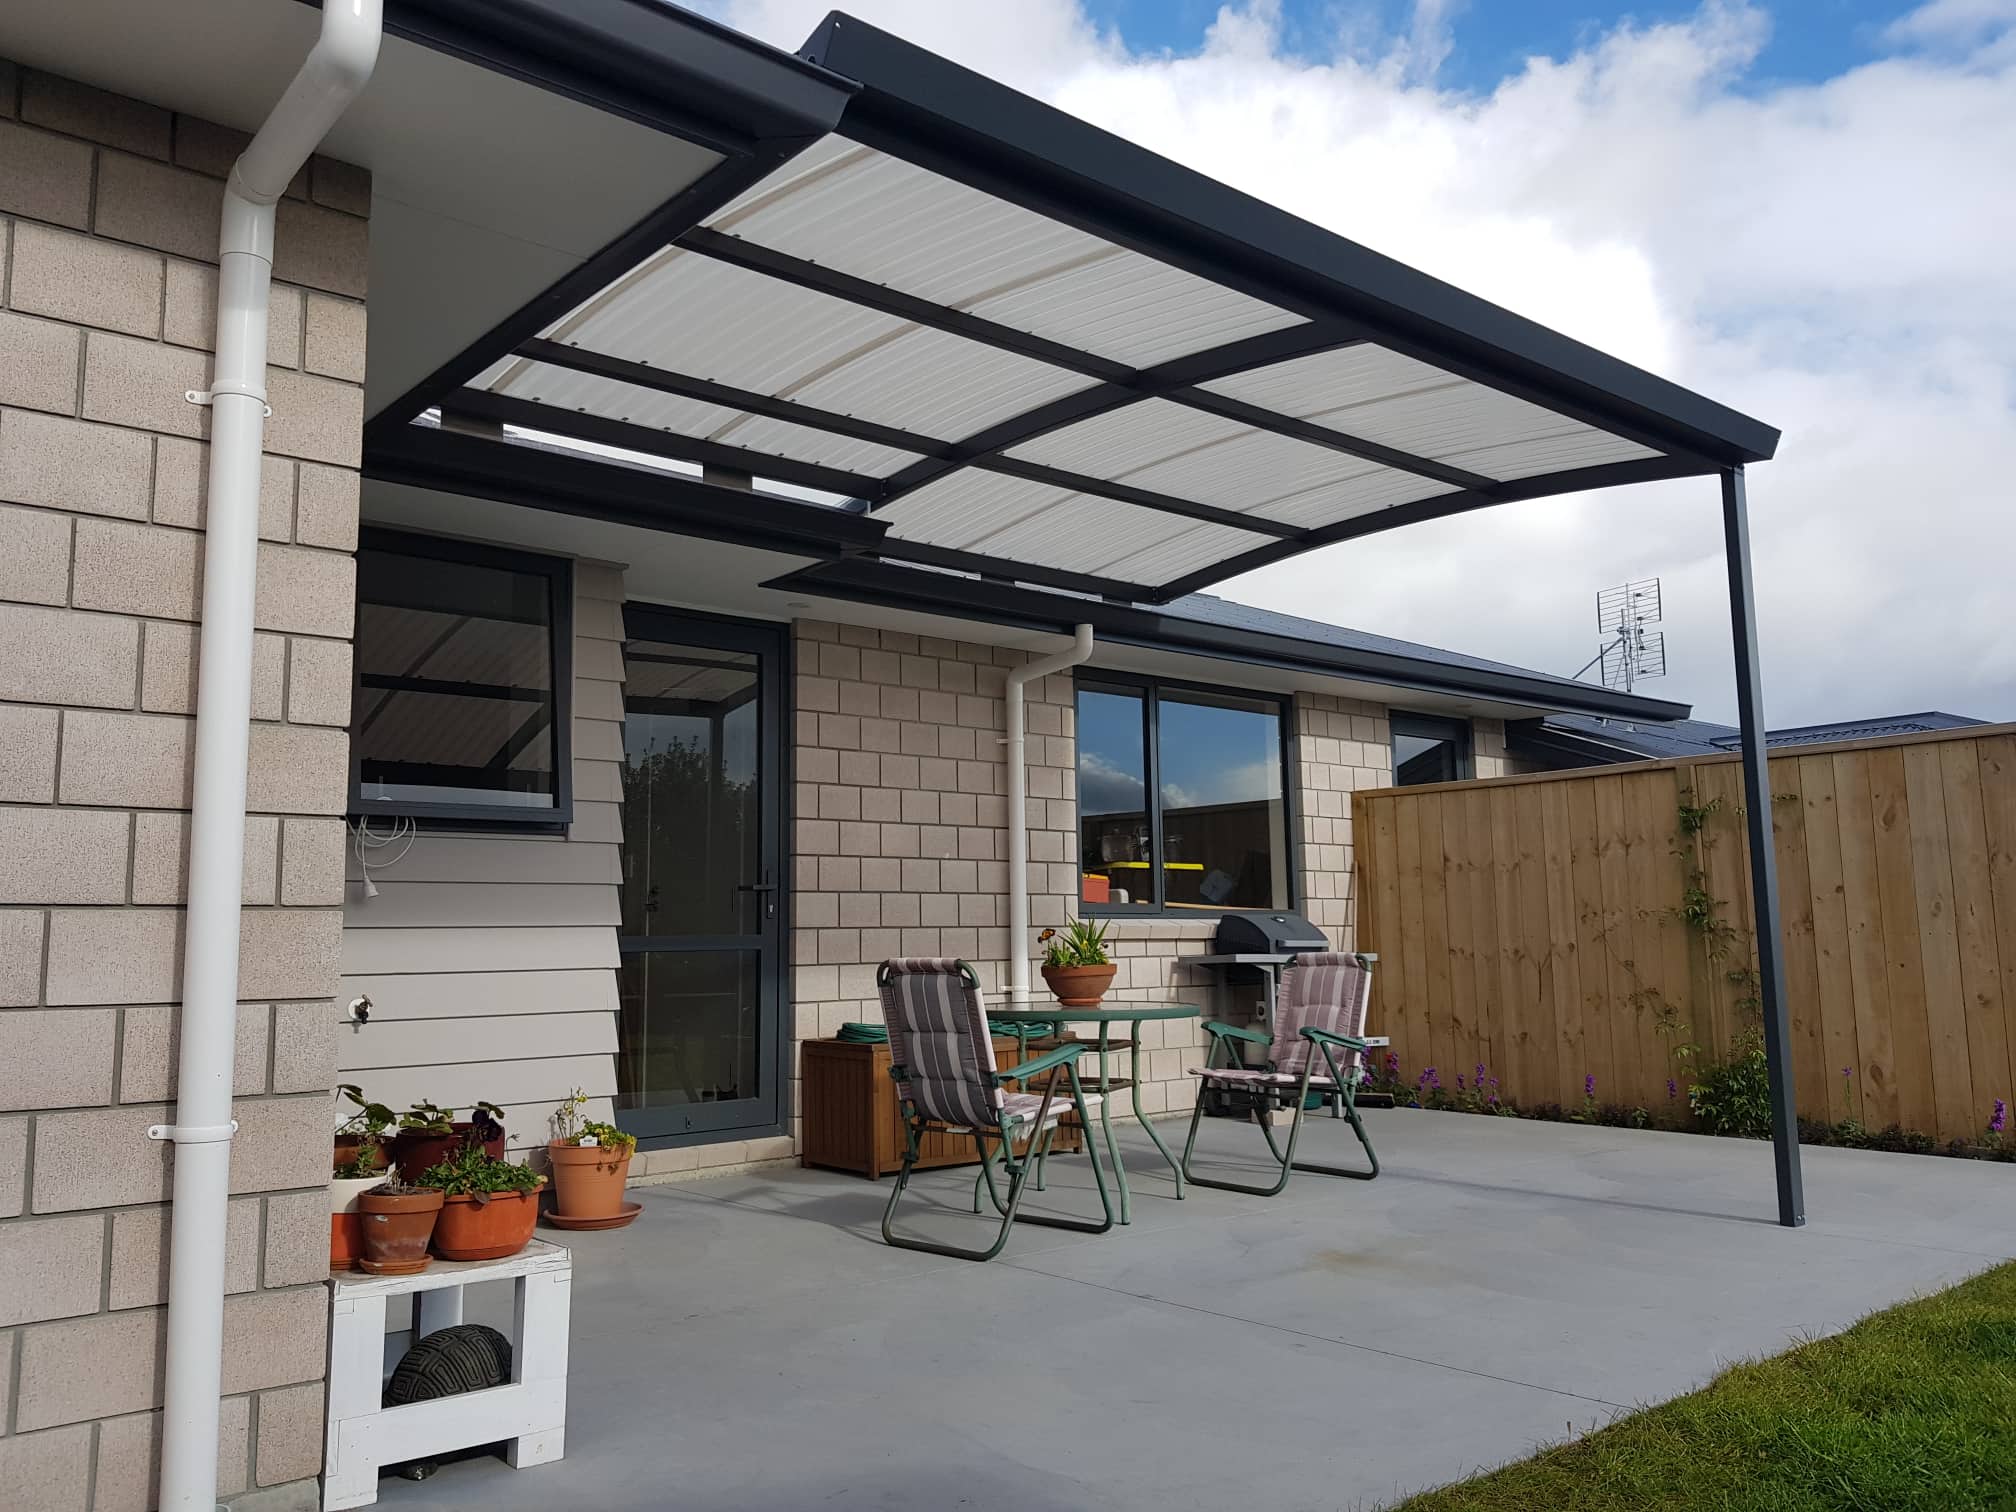 curved awnings